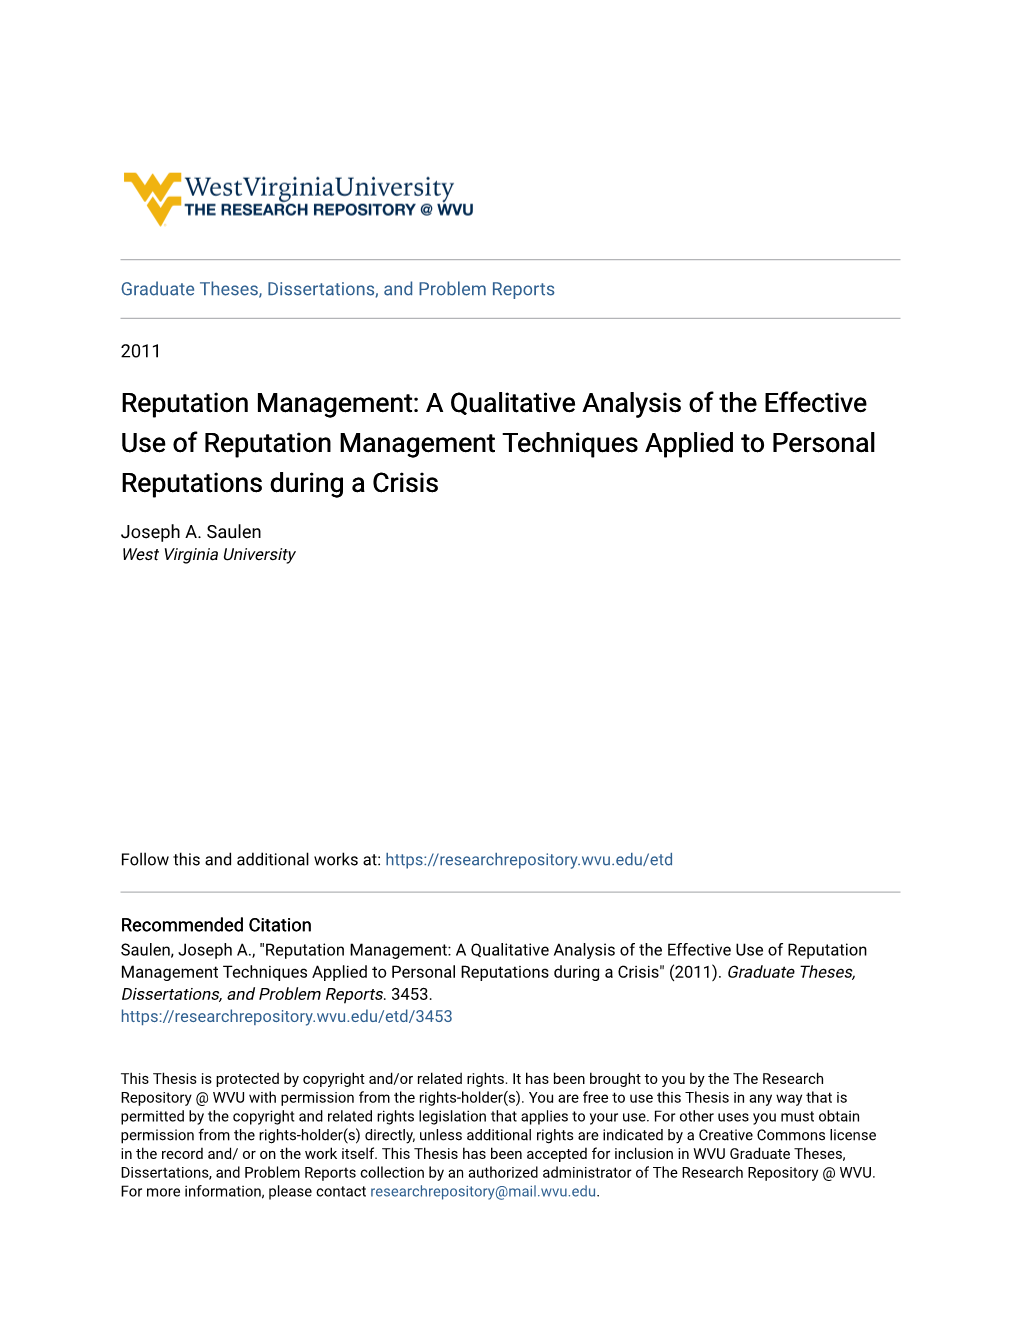 A Qualitative Analysis of the Effective Use of Reputation Management Techniques Applied to Personal Reputations During a Crisis